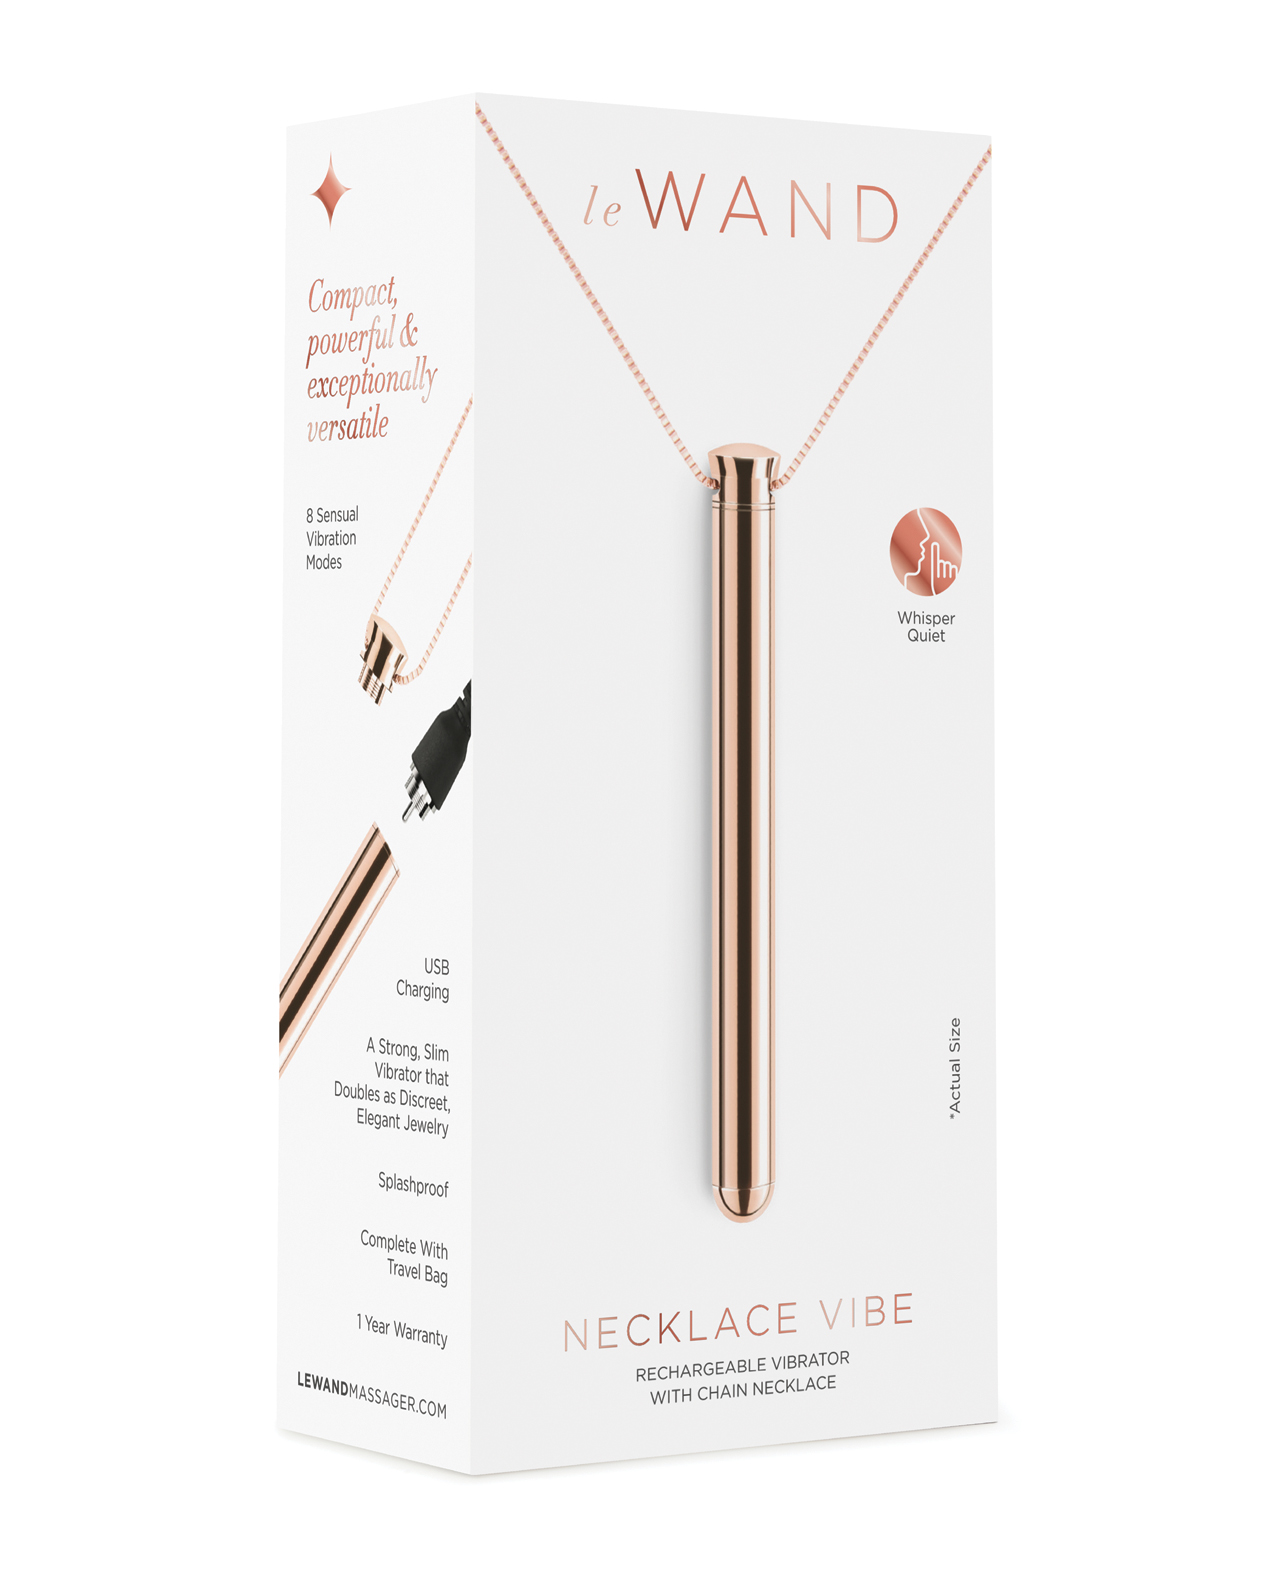 Le Wand Necklace Vibe in Rose Gold on a white box